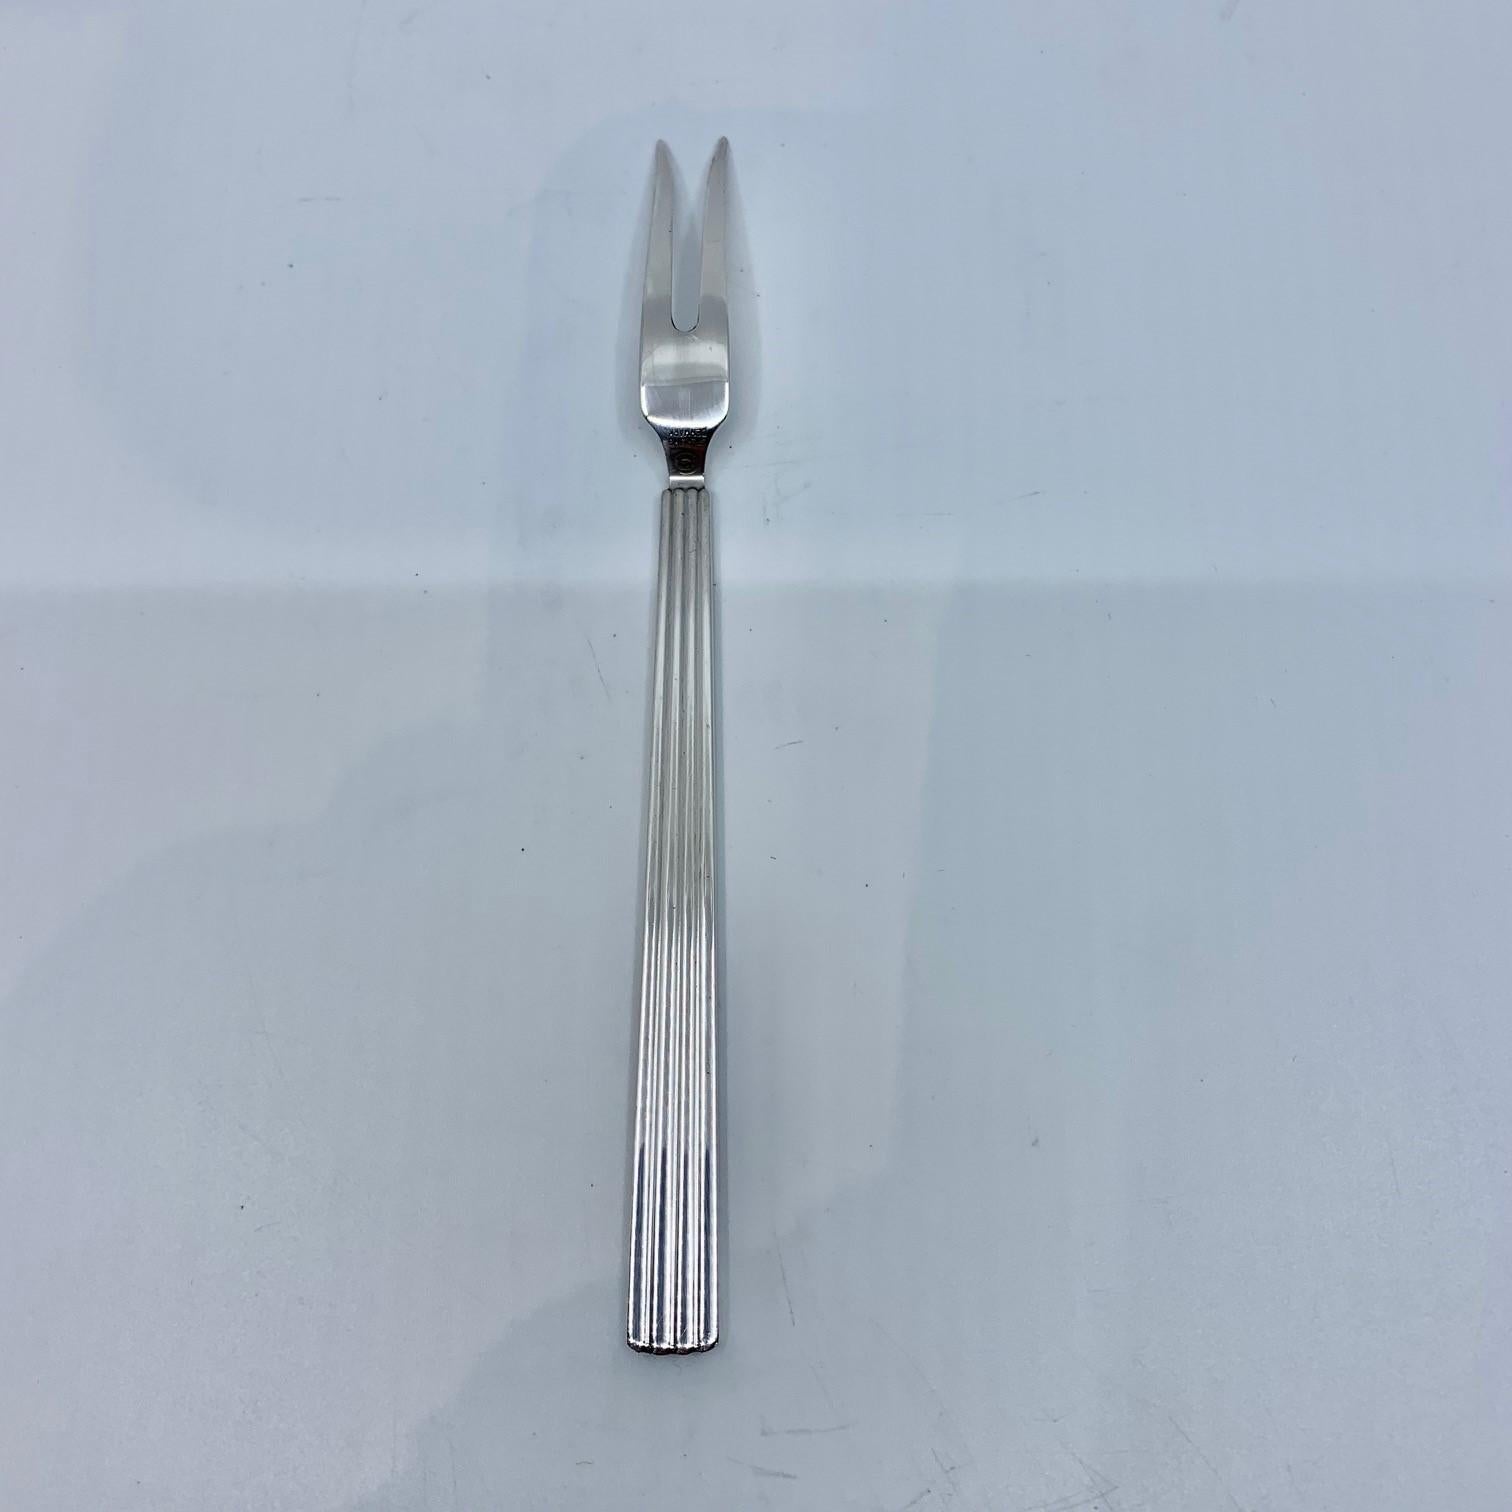 Sterling silver Georg Jensen cold cuts fork, item 144 in the Bernadotte pattern, design #9 by Sigvard Bernadotte from 1939.

Additional information:
Material: Sterling Silver
Style: Art Deco
Hallmarks: With Georg Jensen hallmark, made in